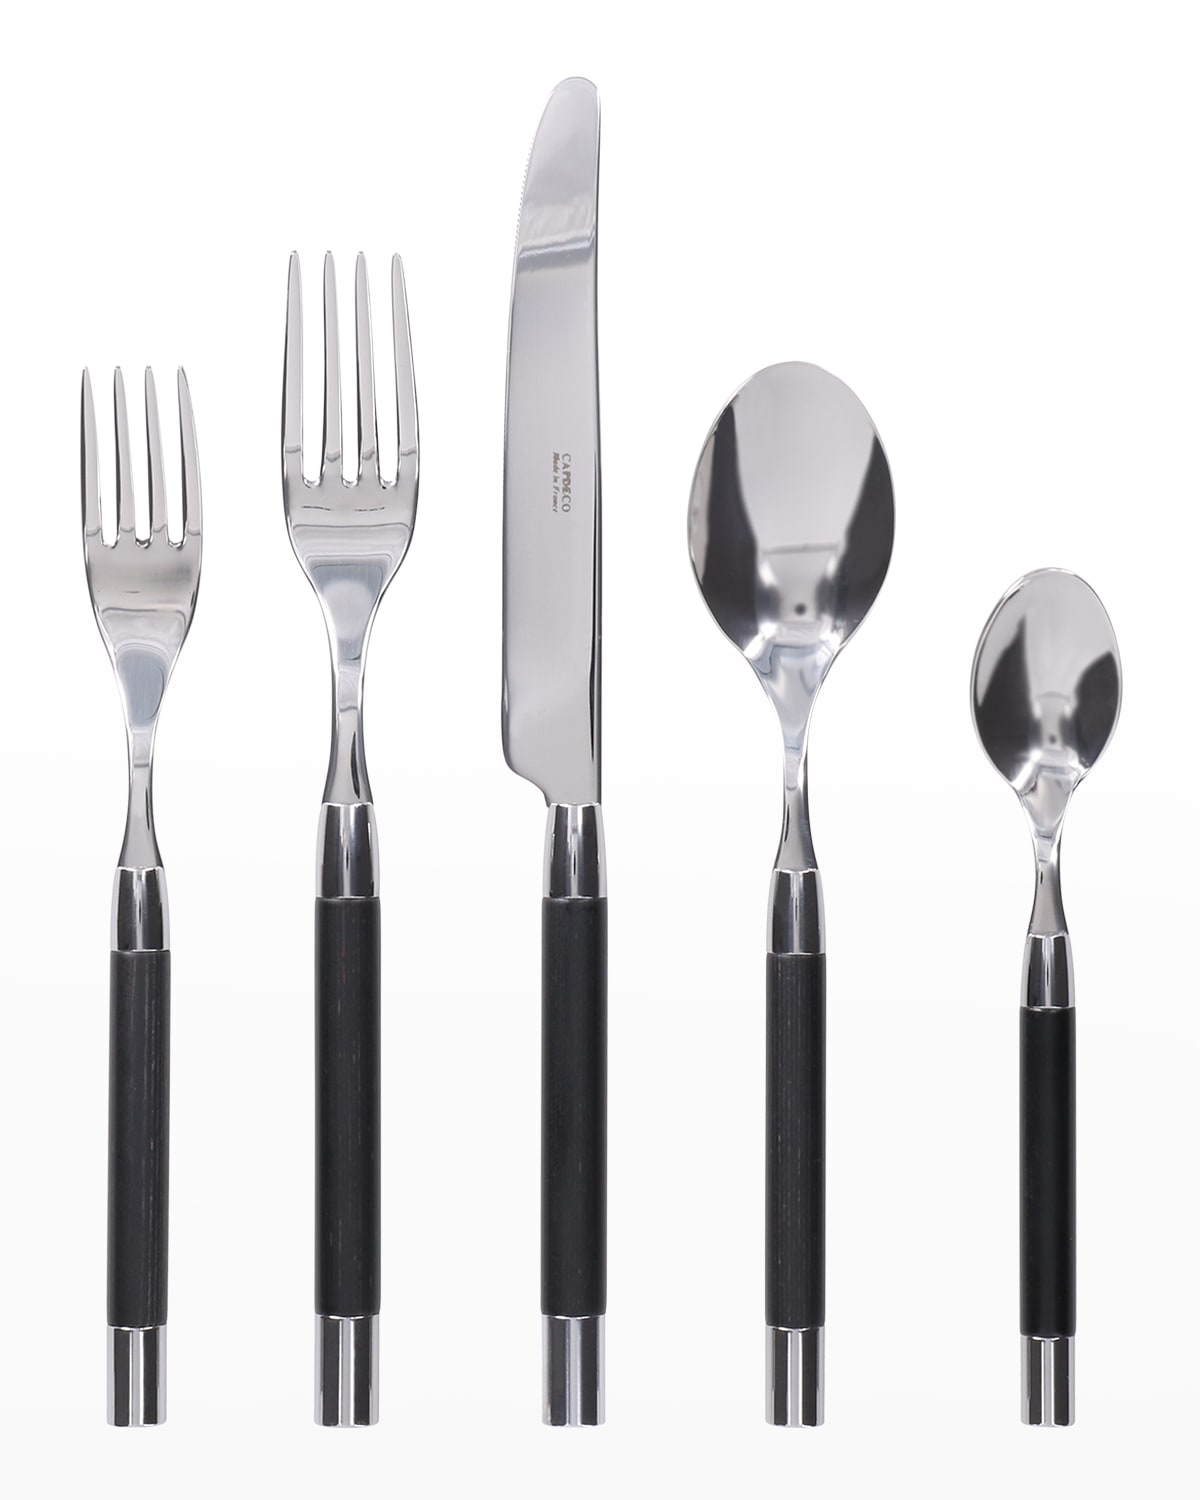 Capdeco Conty 5-piece Place Setting, Black Wood